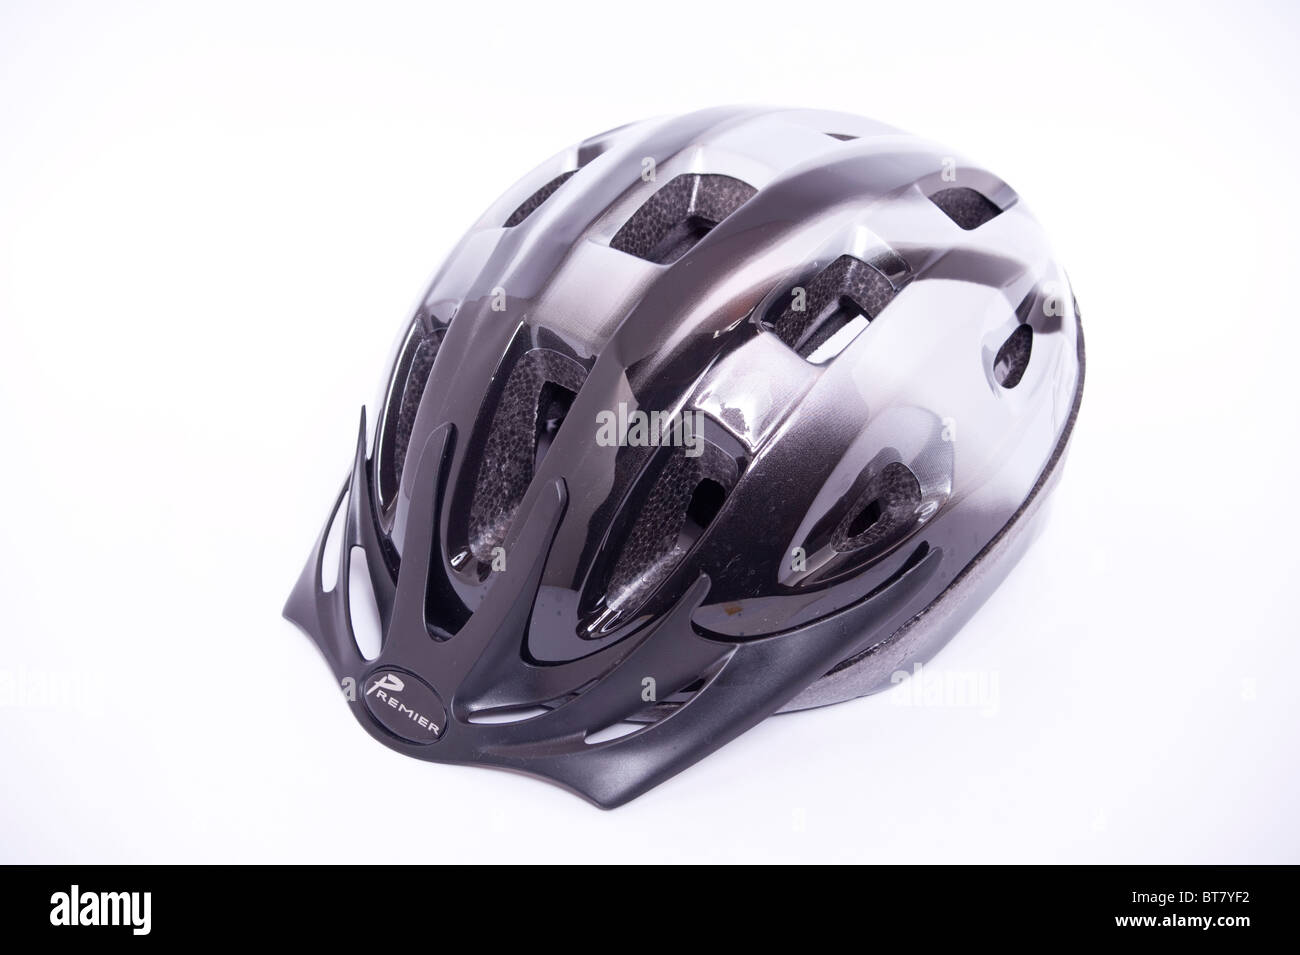 A close up photo of a cycle safety helmet against a white background Stock Photo